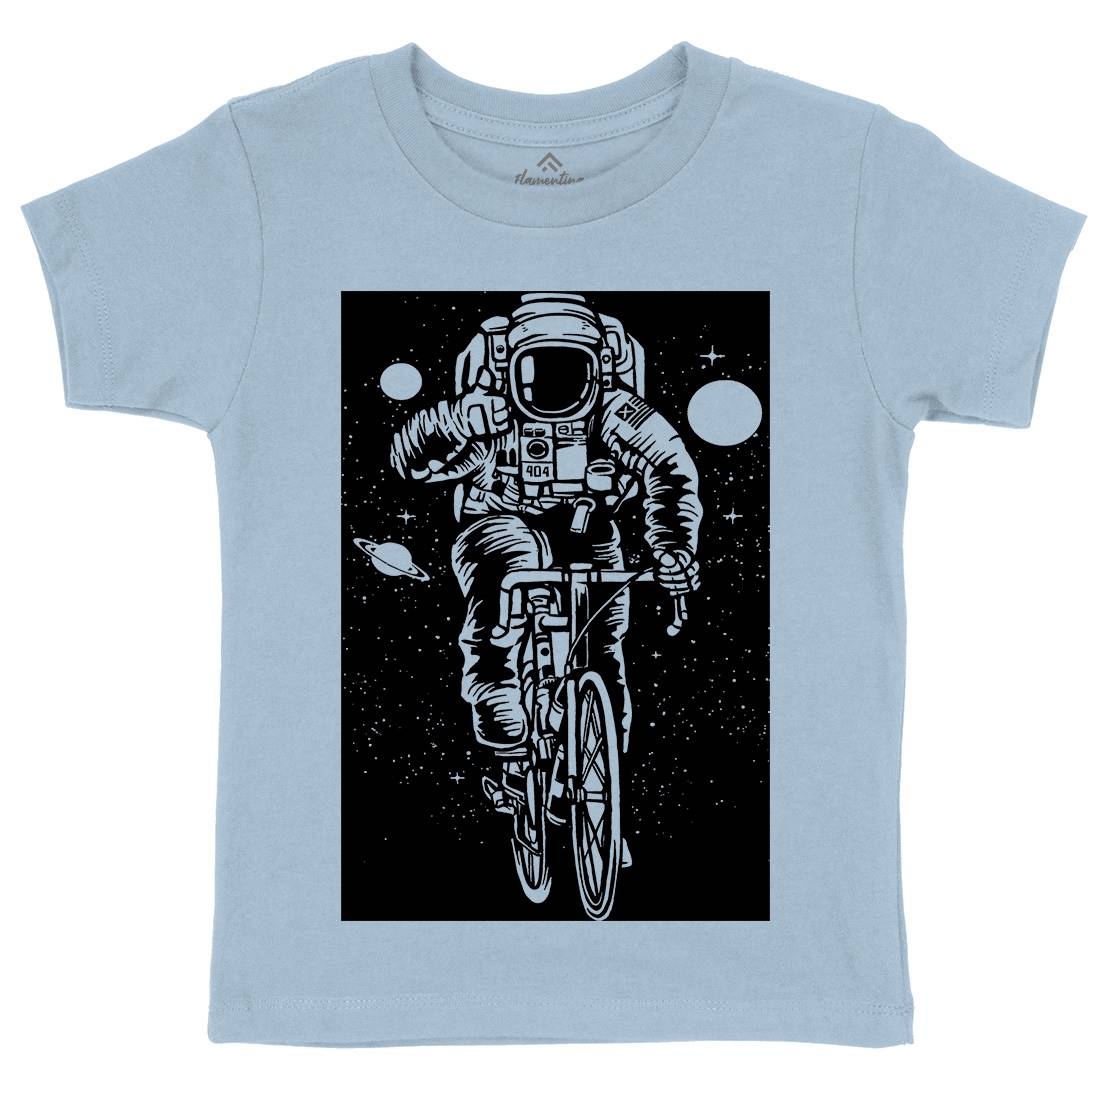 Astronaut Bicycle Kids Organic Crew Neck T-Shirt Space A503